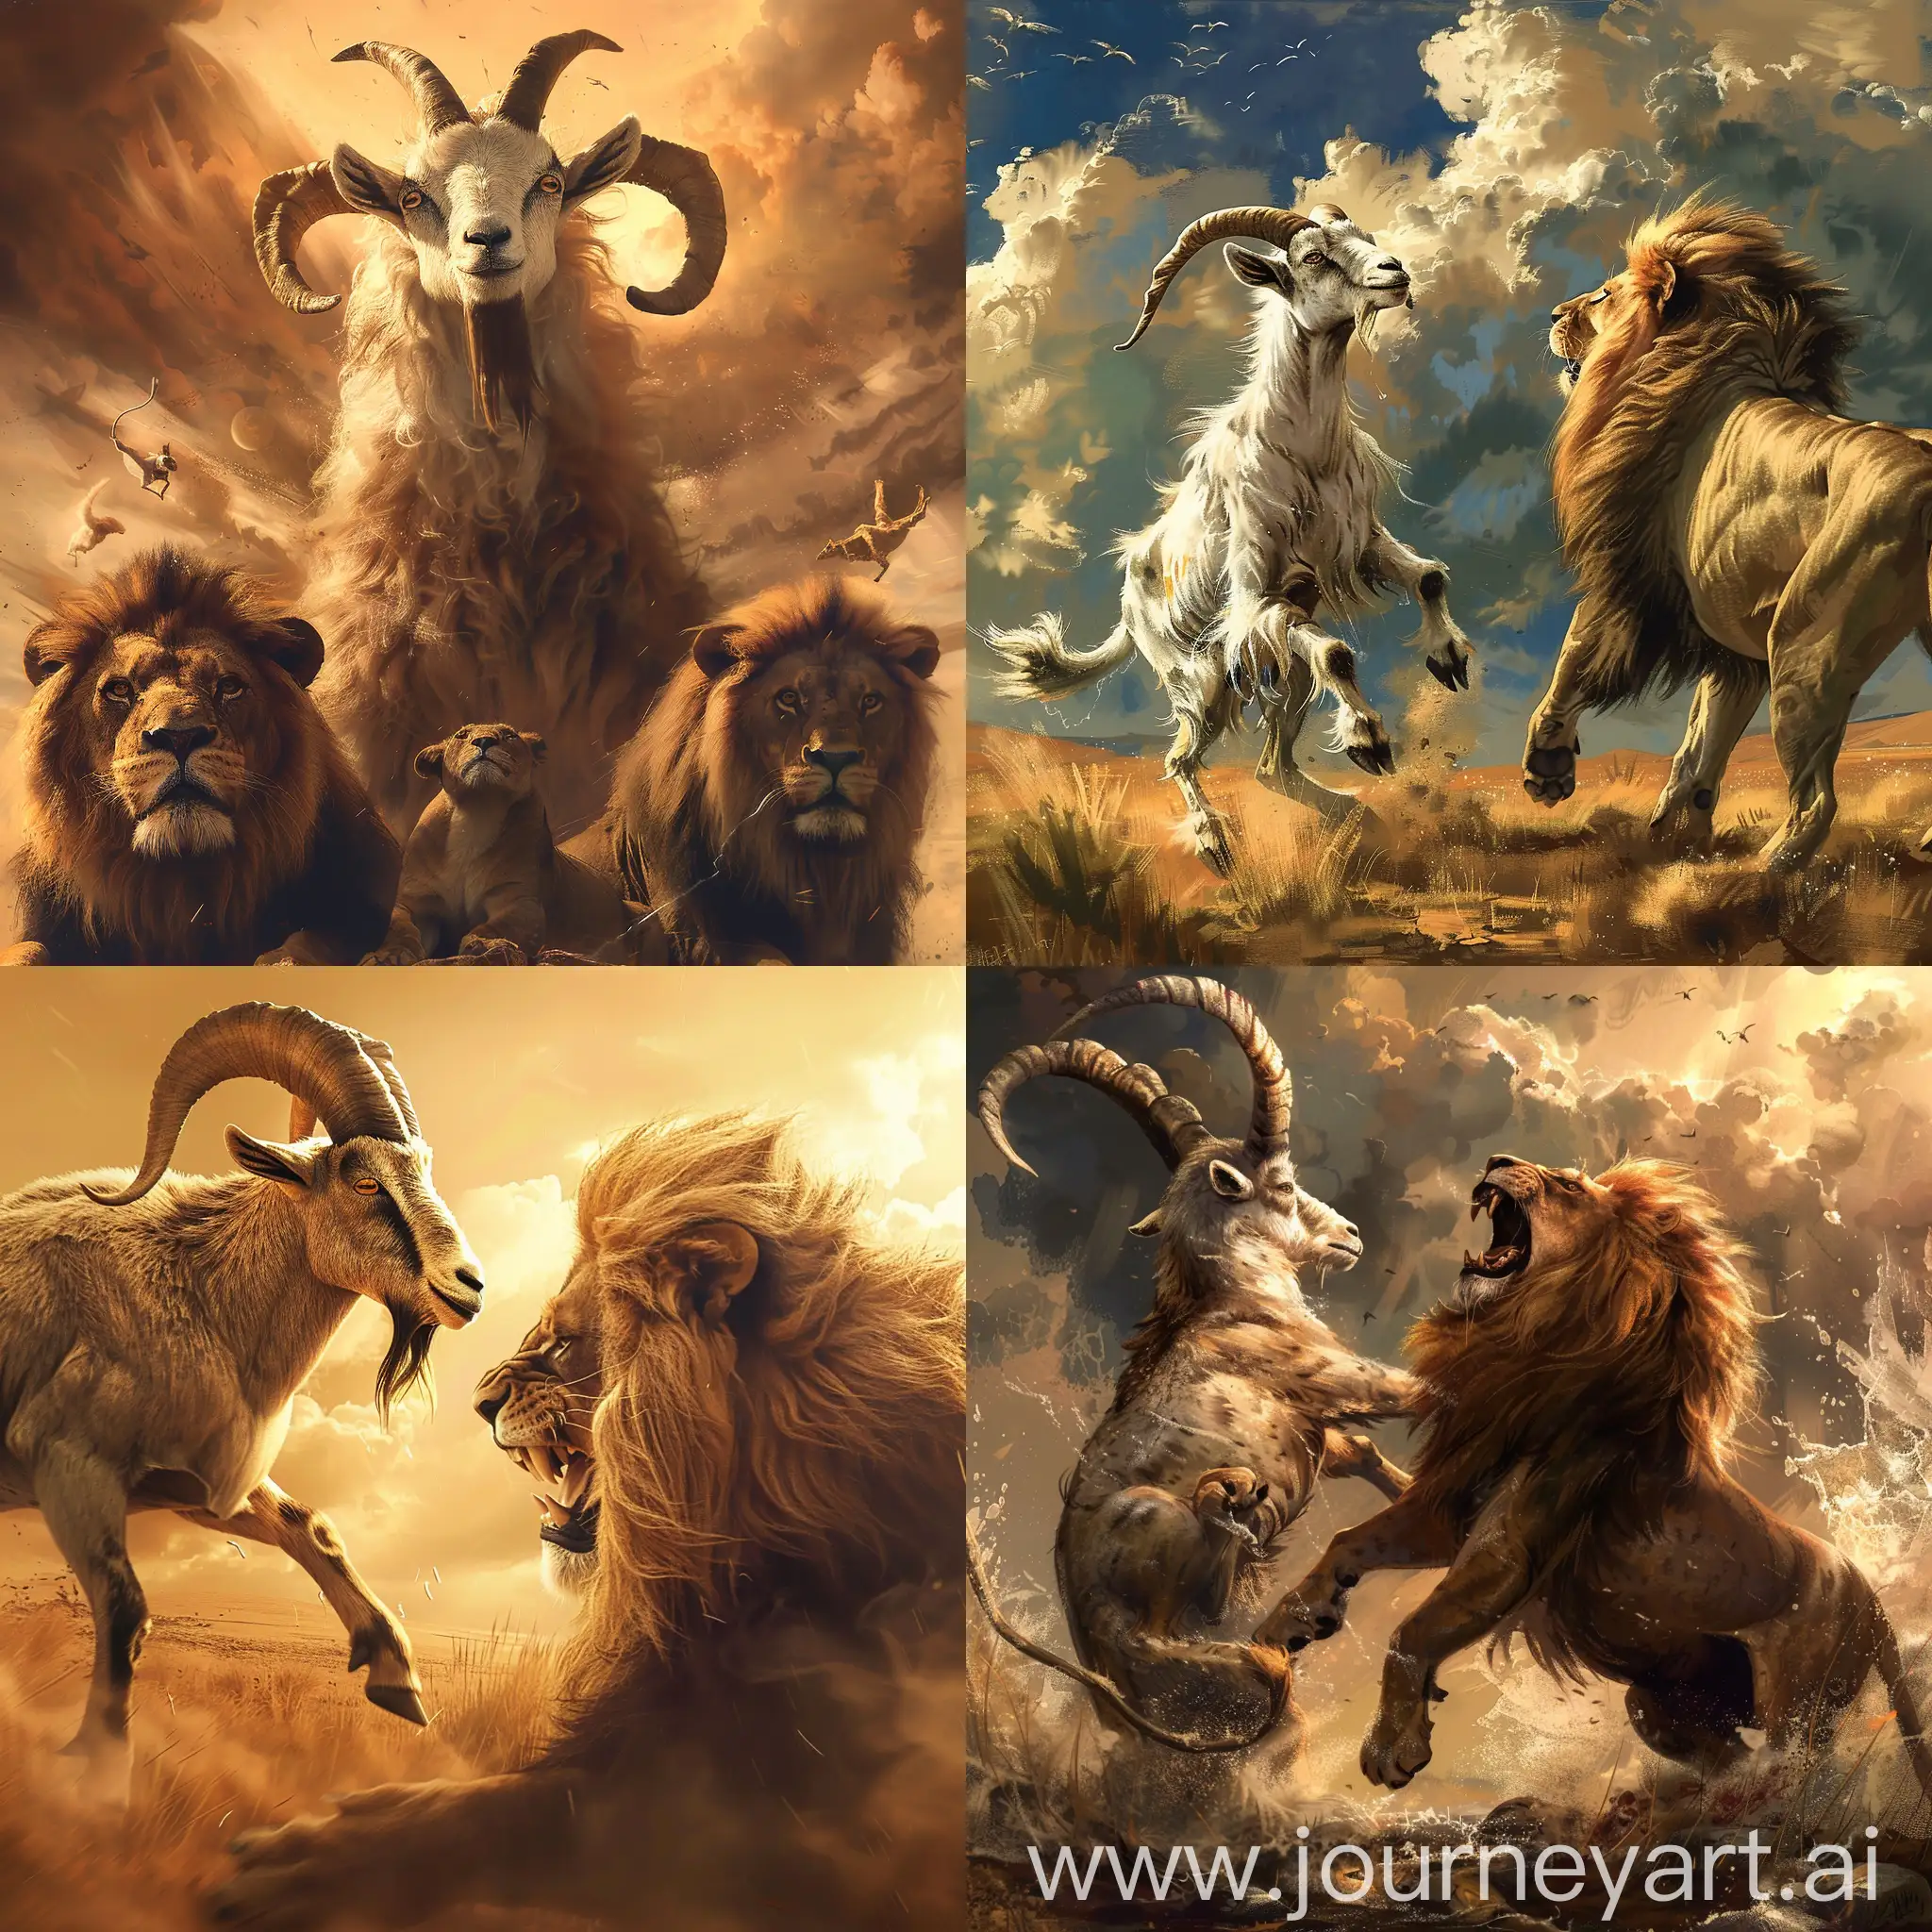 The great goat of god killed the king of lion